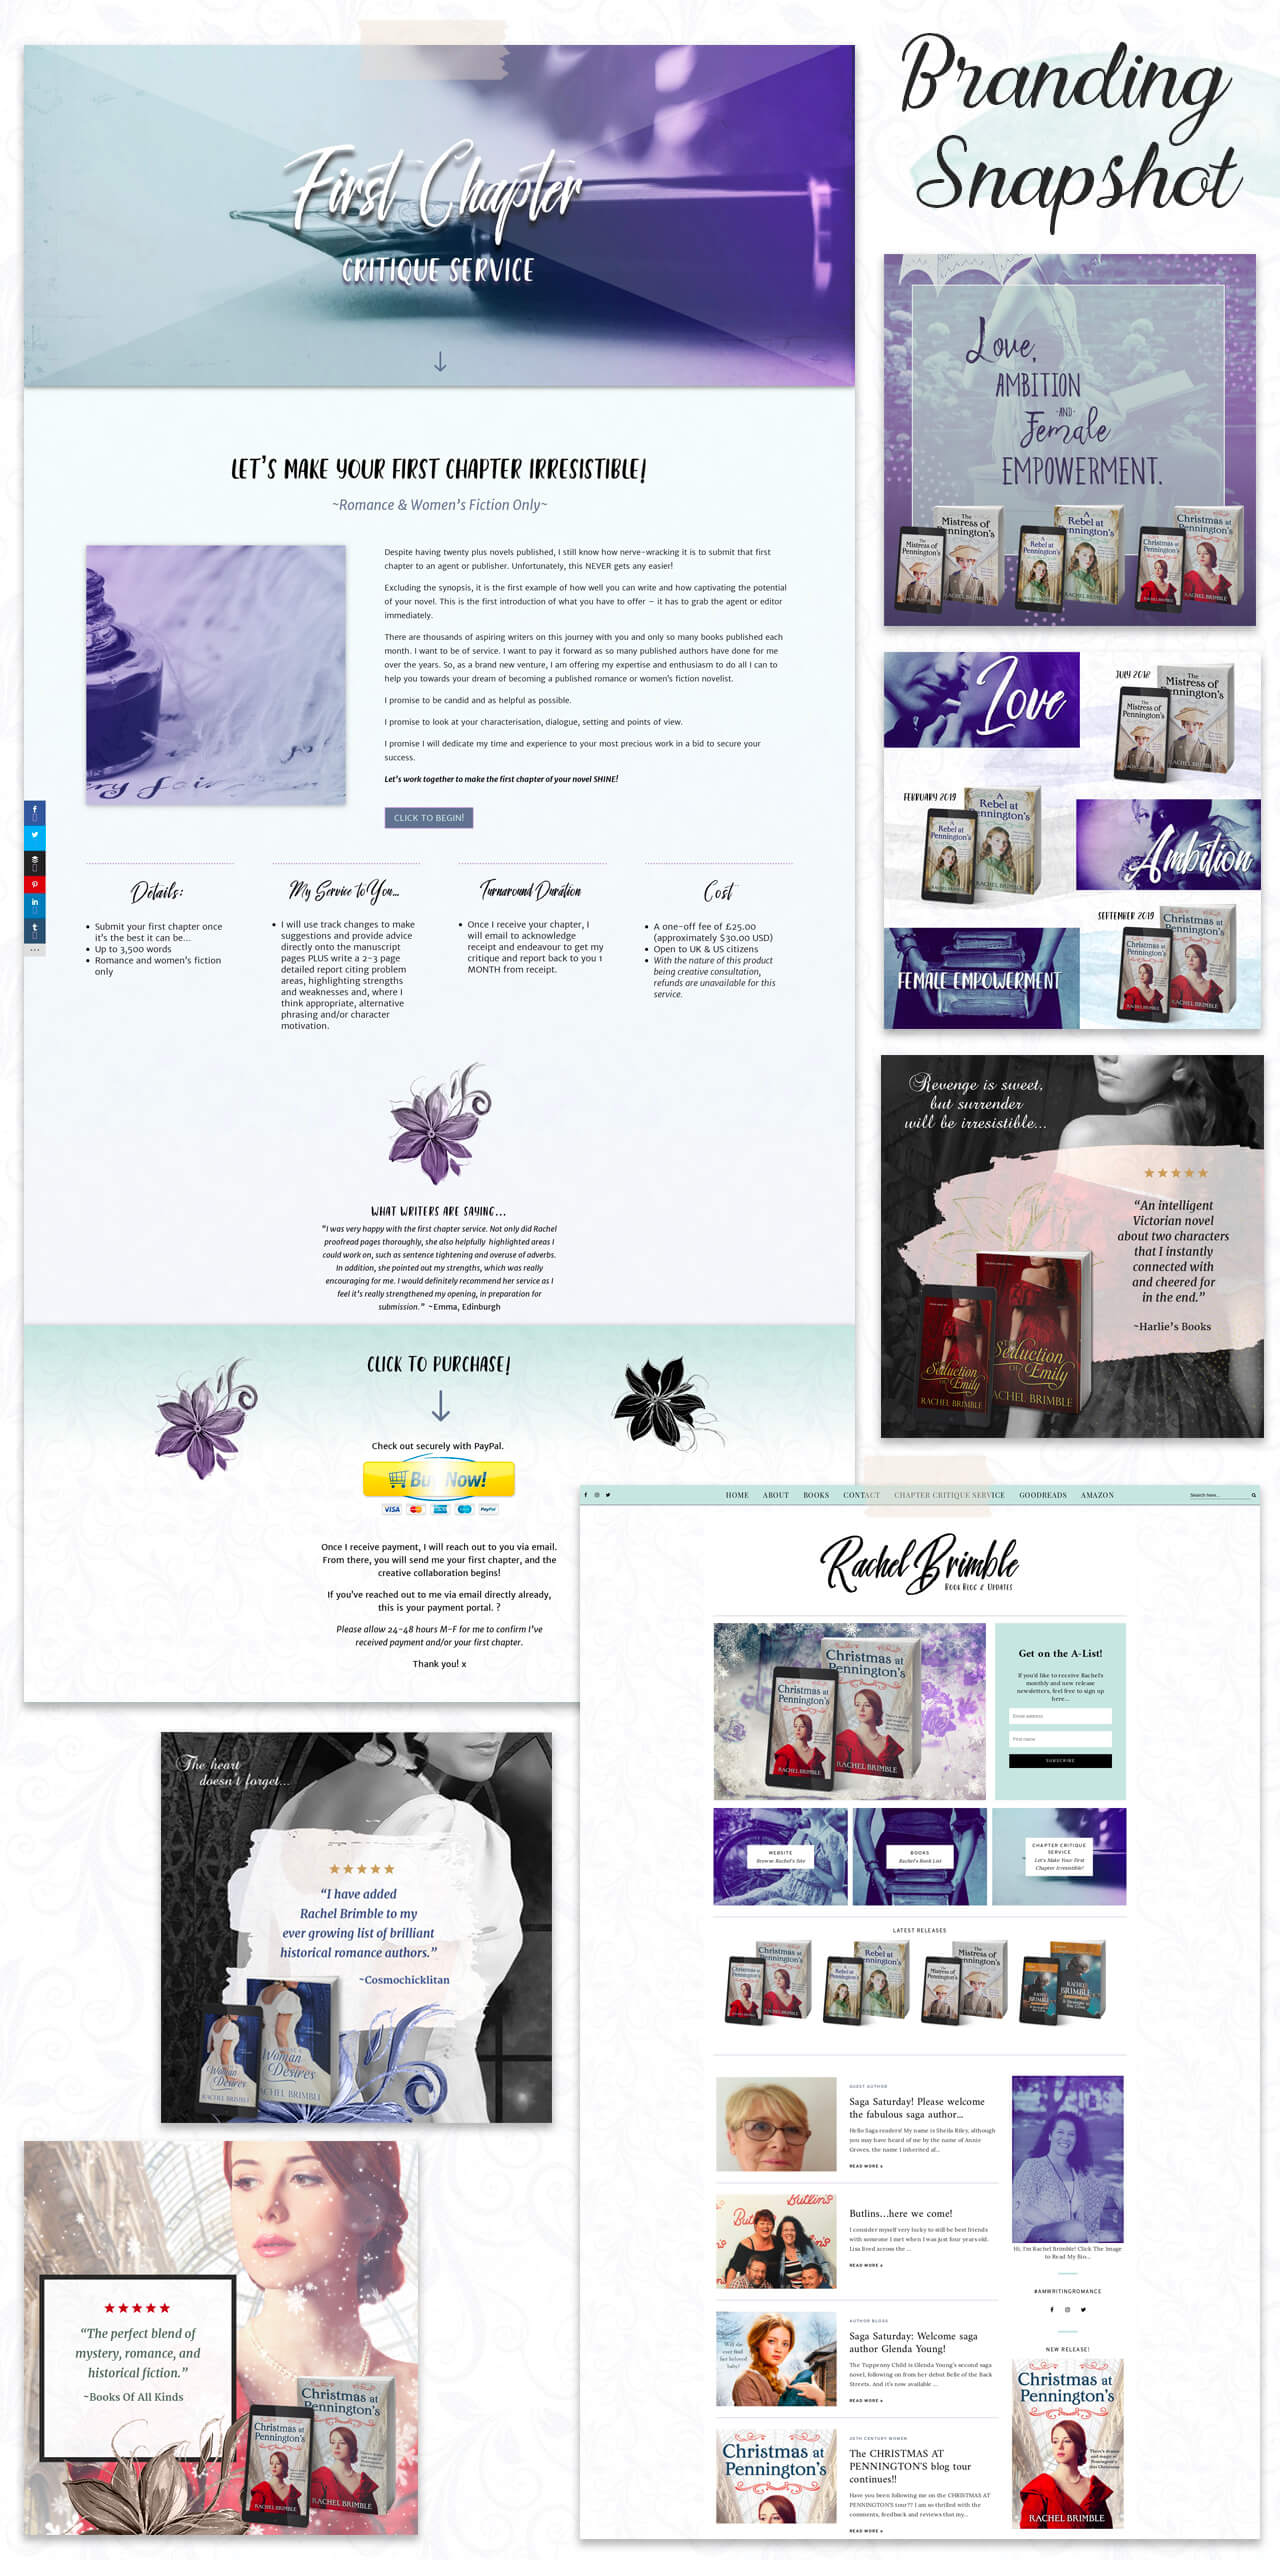 Author Branding Package for Rachel Brimble - Designed by Clever Unicorn